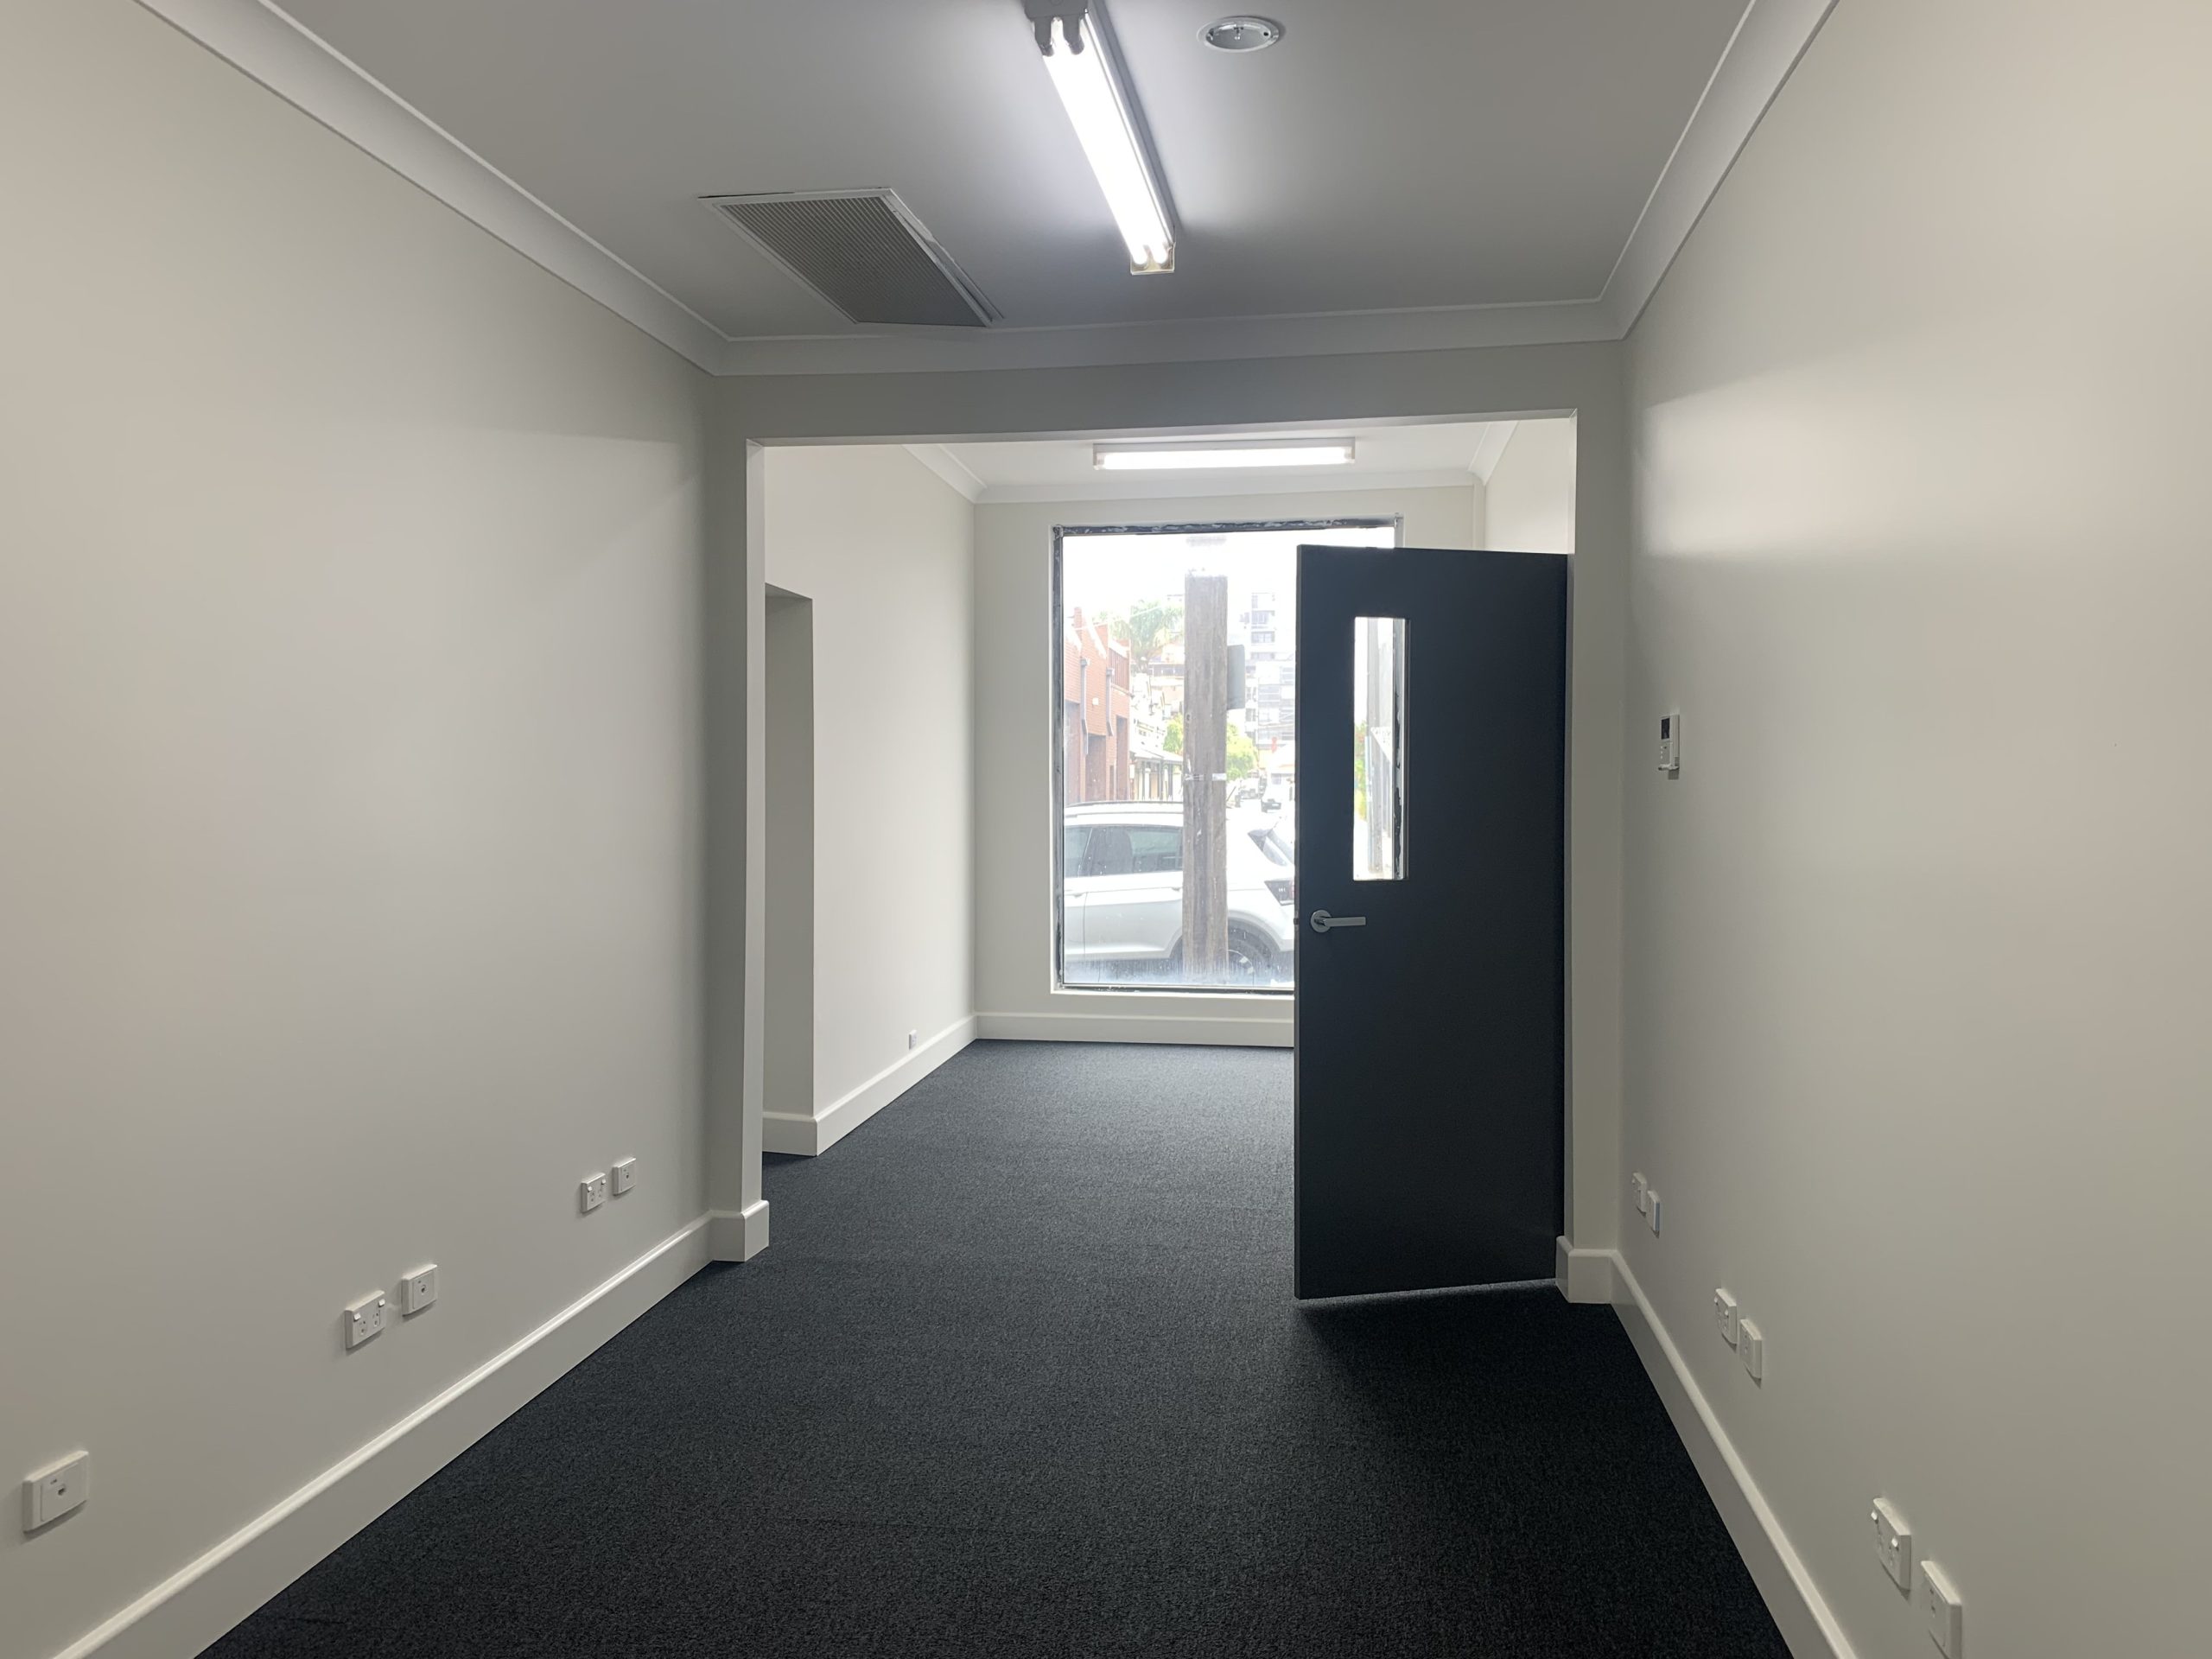 Commercial Painting Melbourne